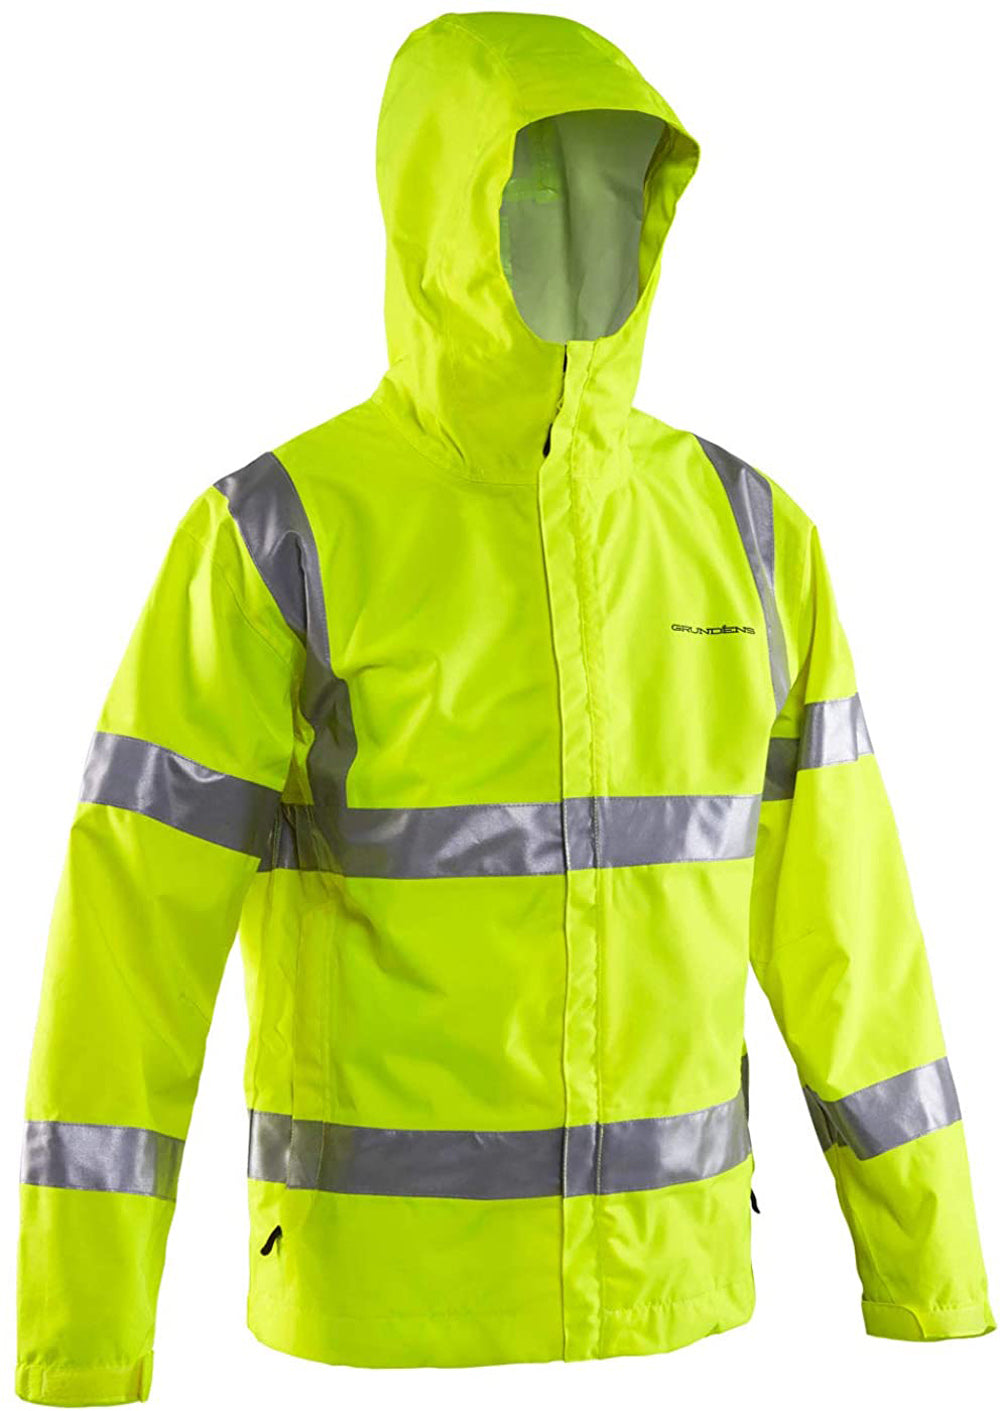 Weather Watch Jacket in Reflective Yellow color from the front view